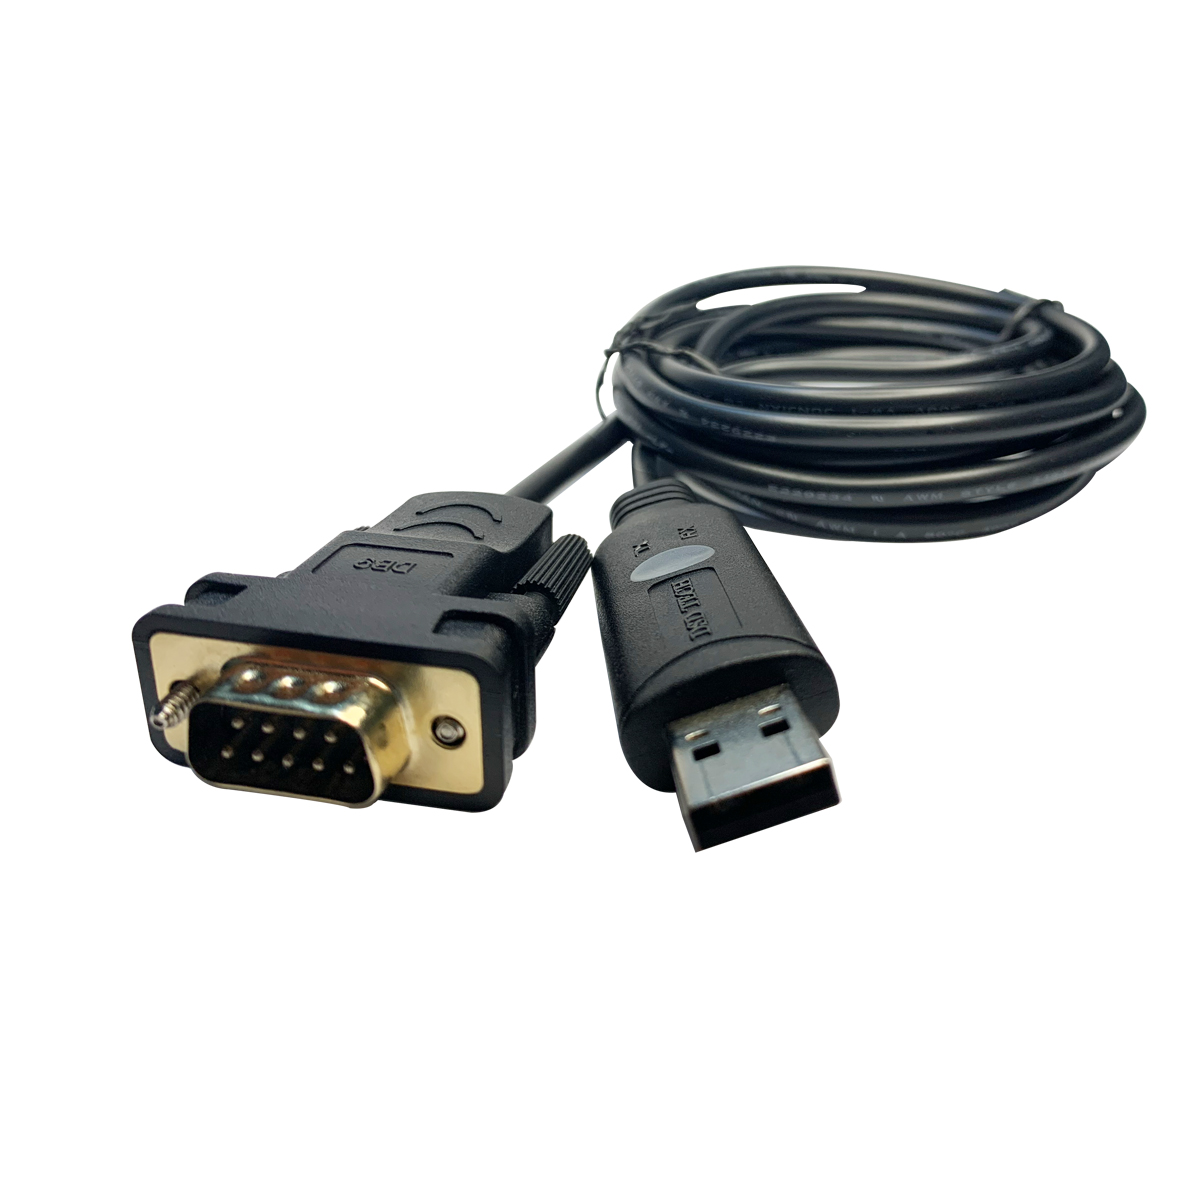 SH-P3A USB to DB9 PPI Programming Cable